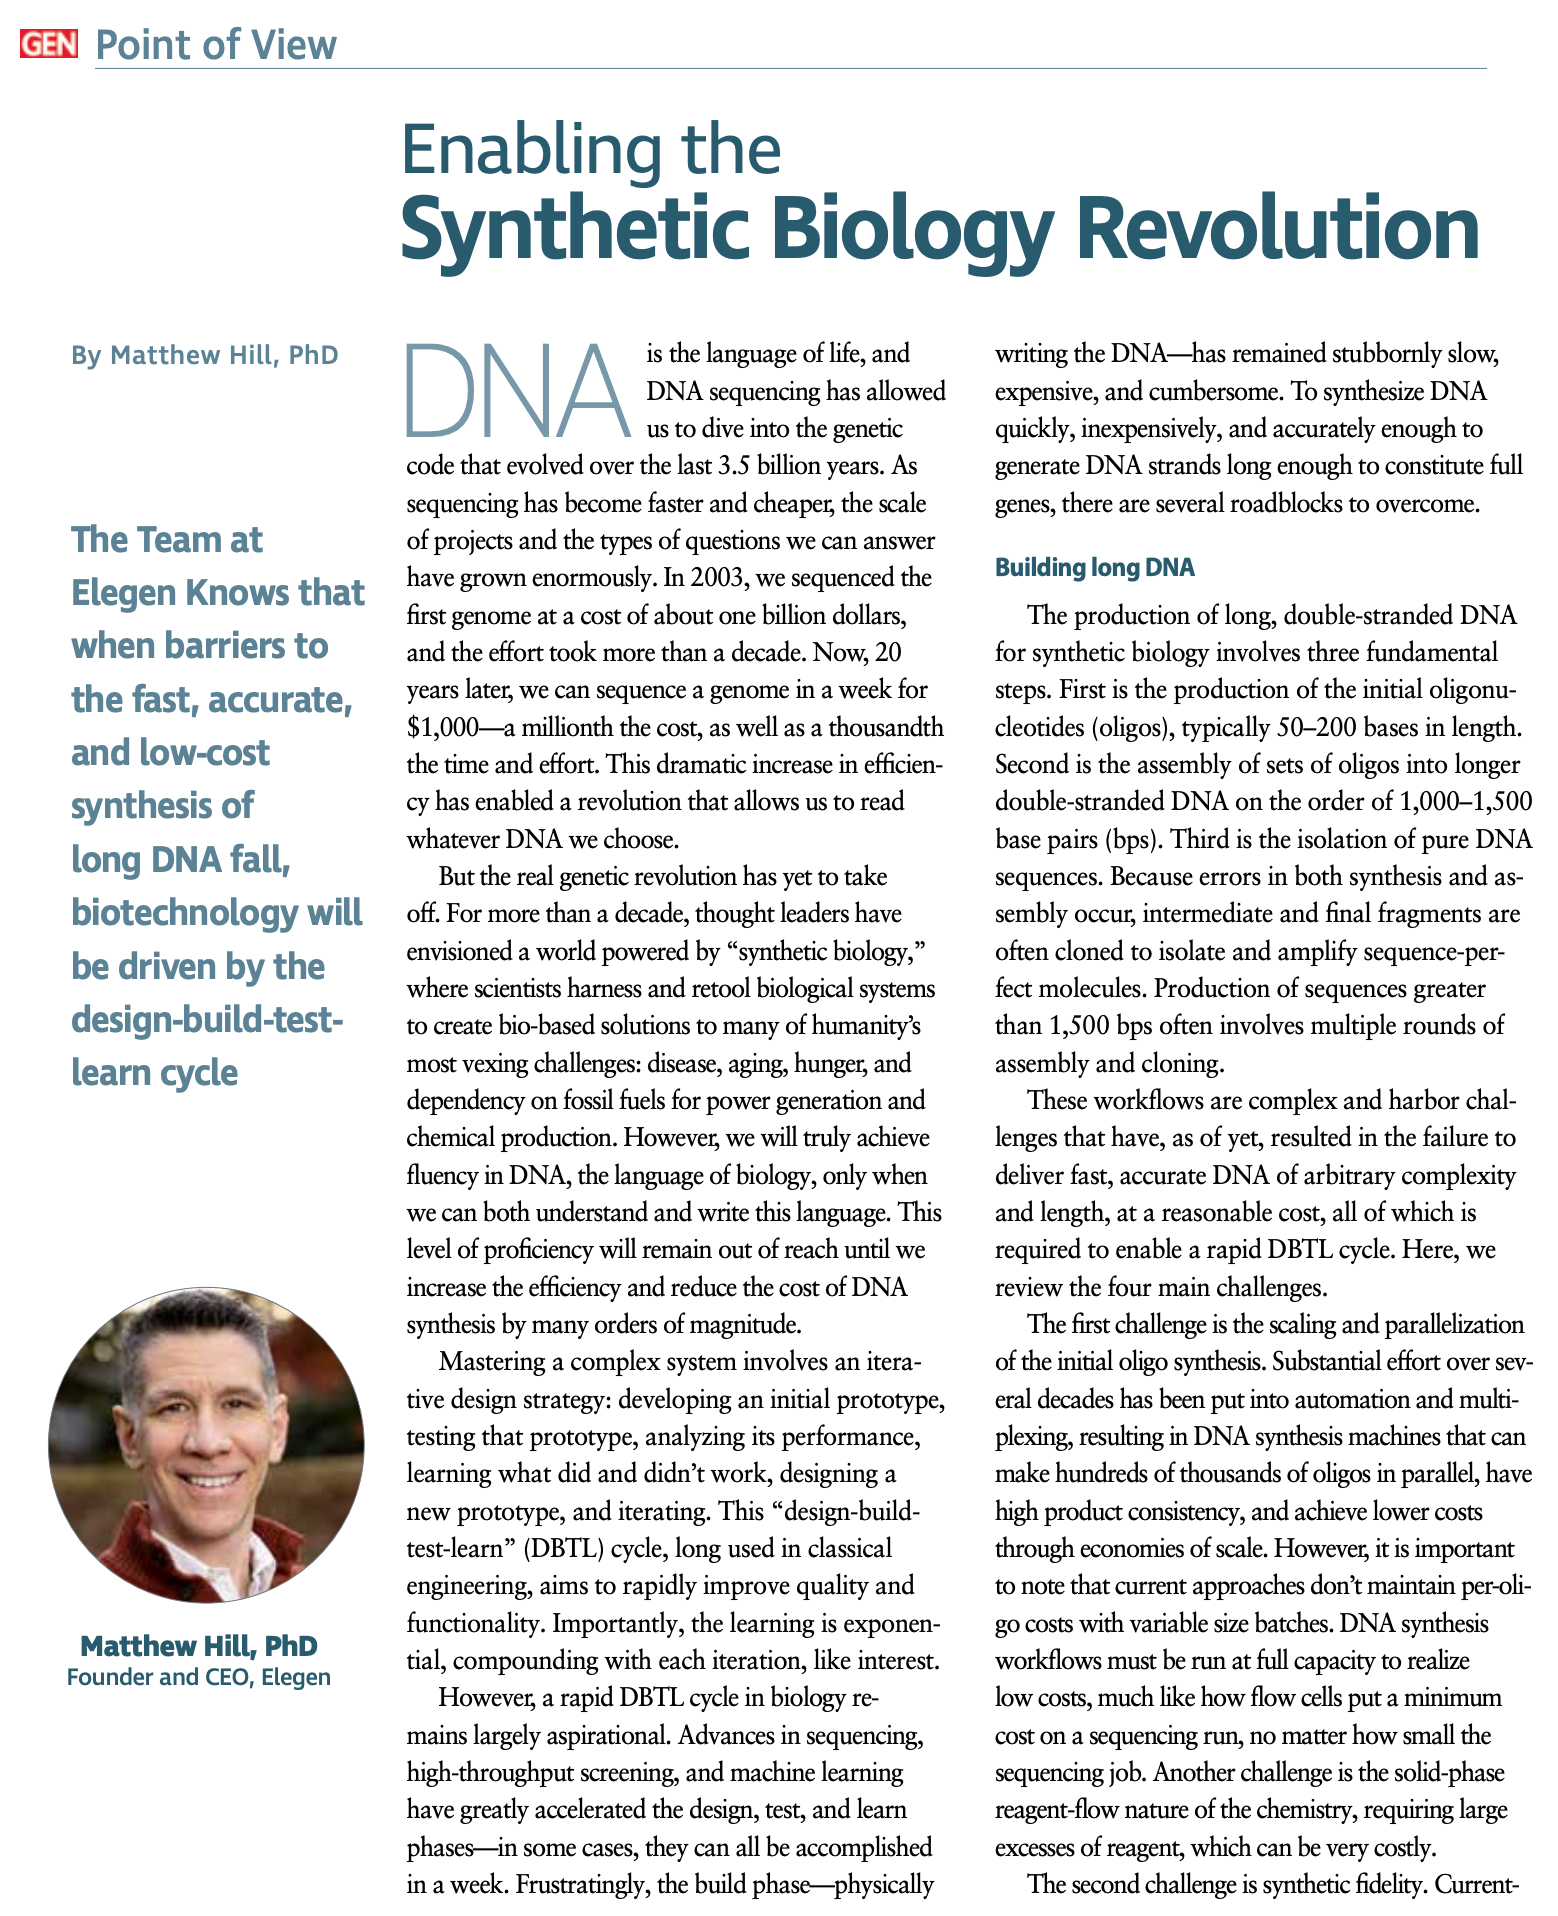 Enabling the Synthetic Biology Revolution